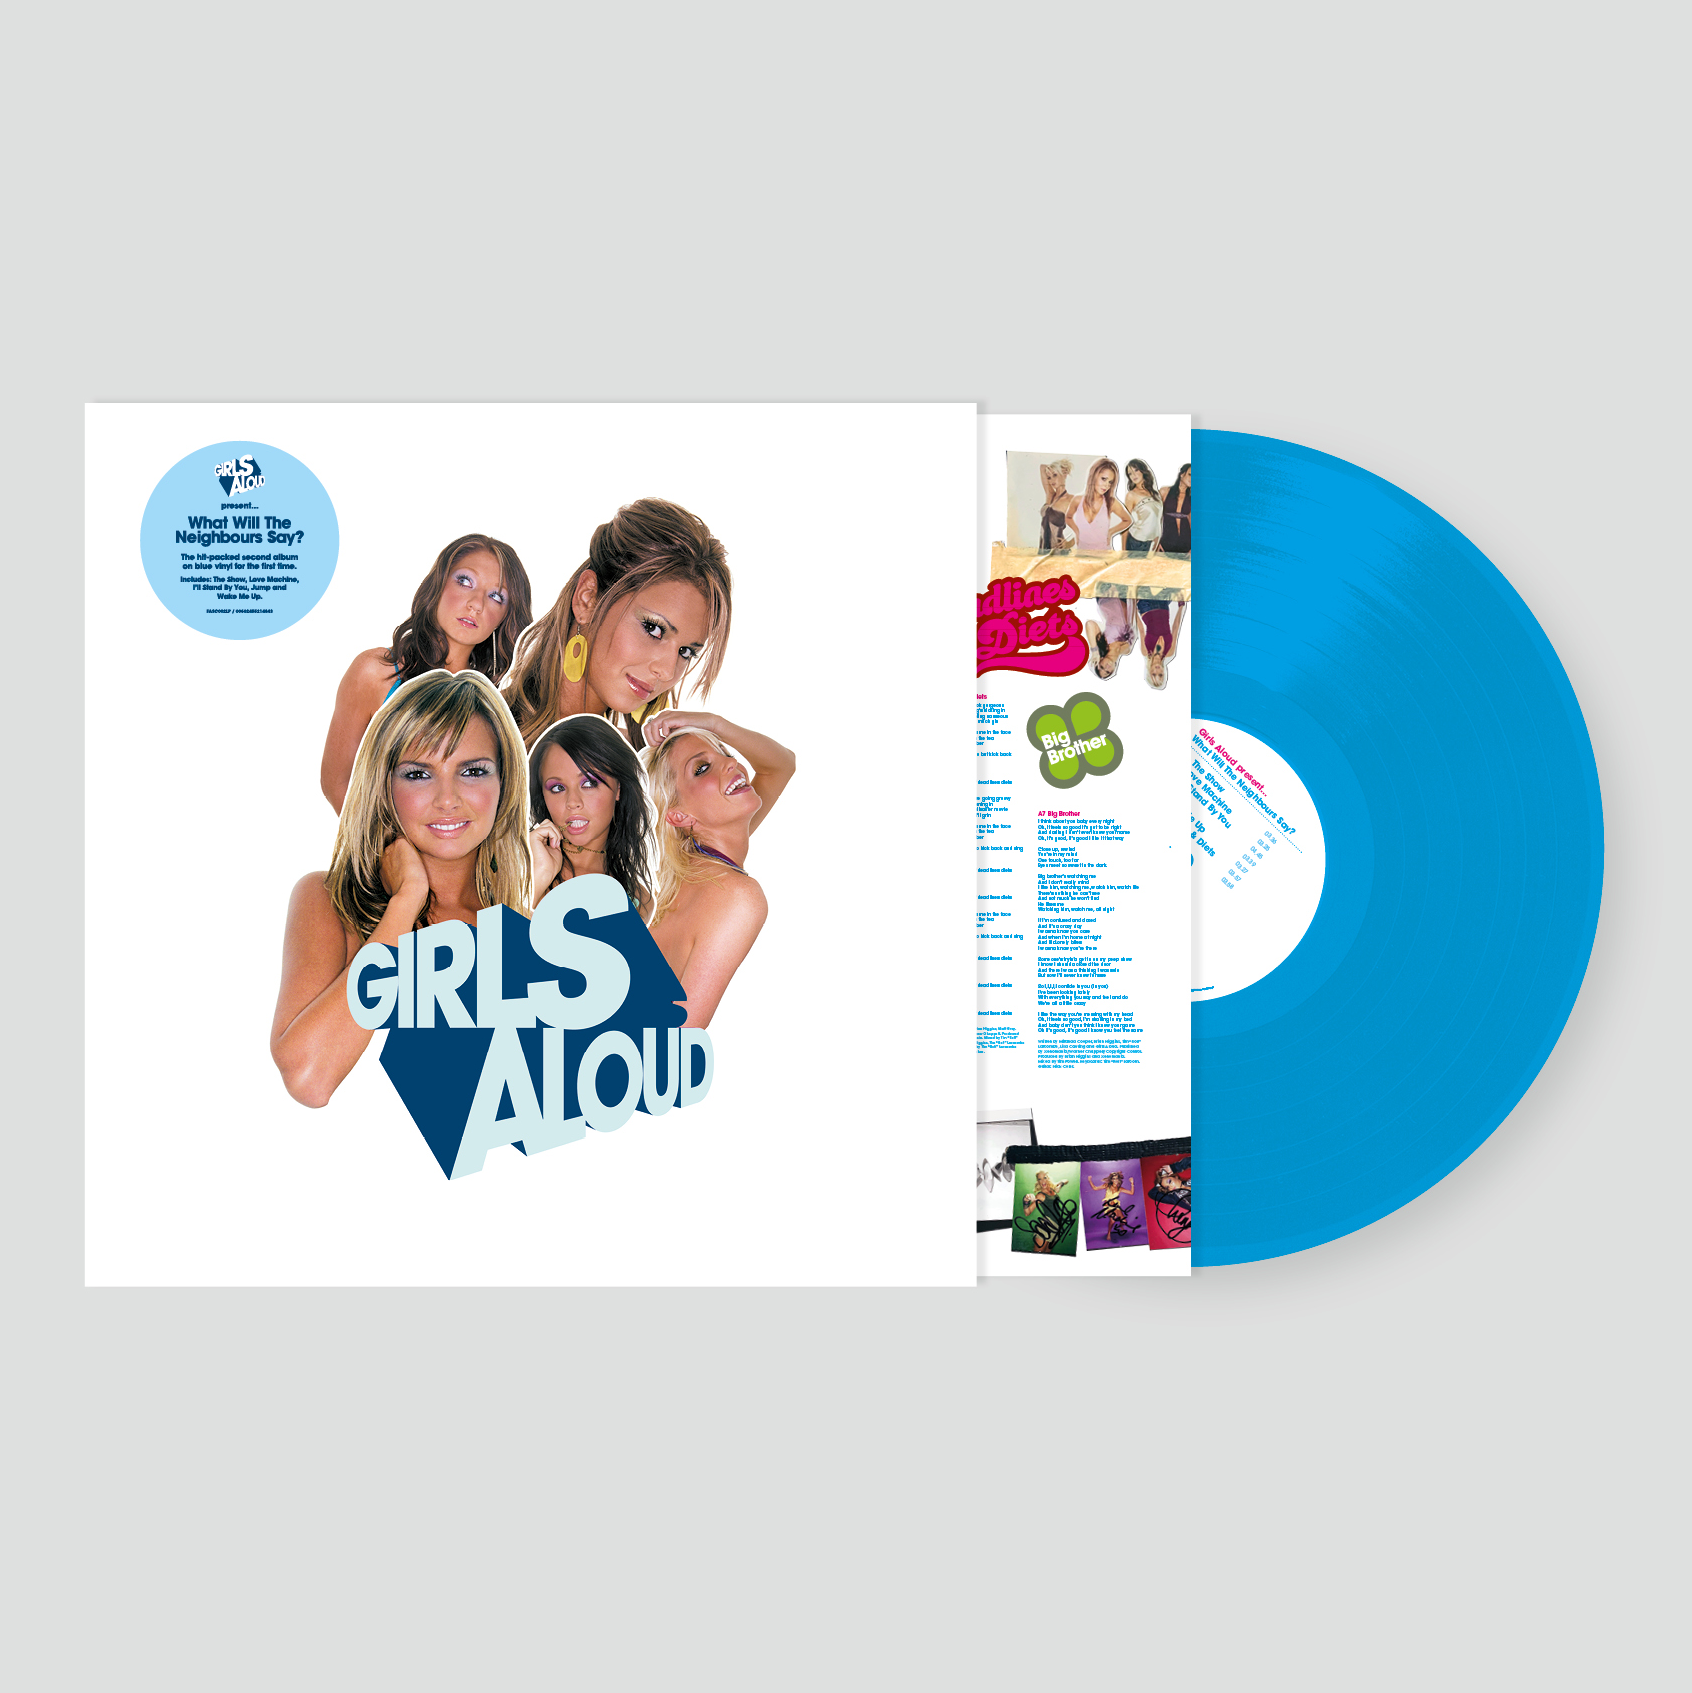 What Will The Neighbours Say (Deluxe Edition): Blue Vinyl LP + A4 Sticker Sheet